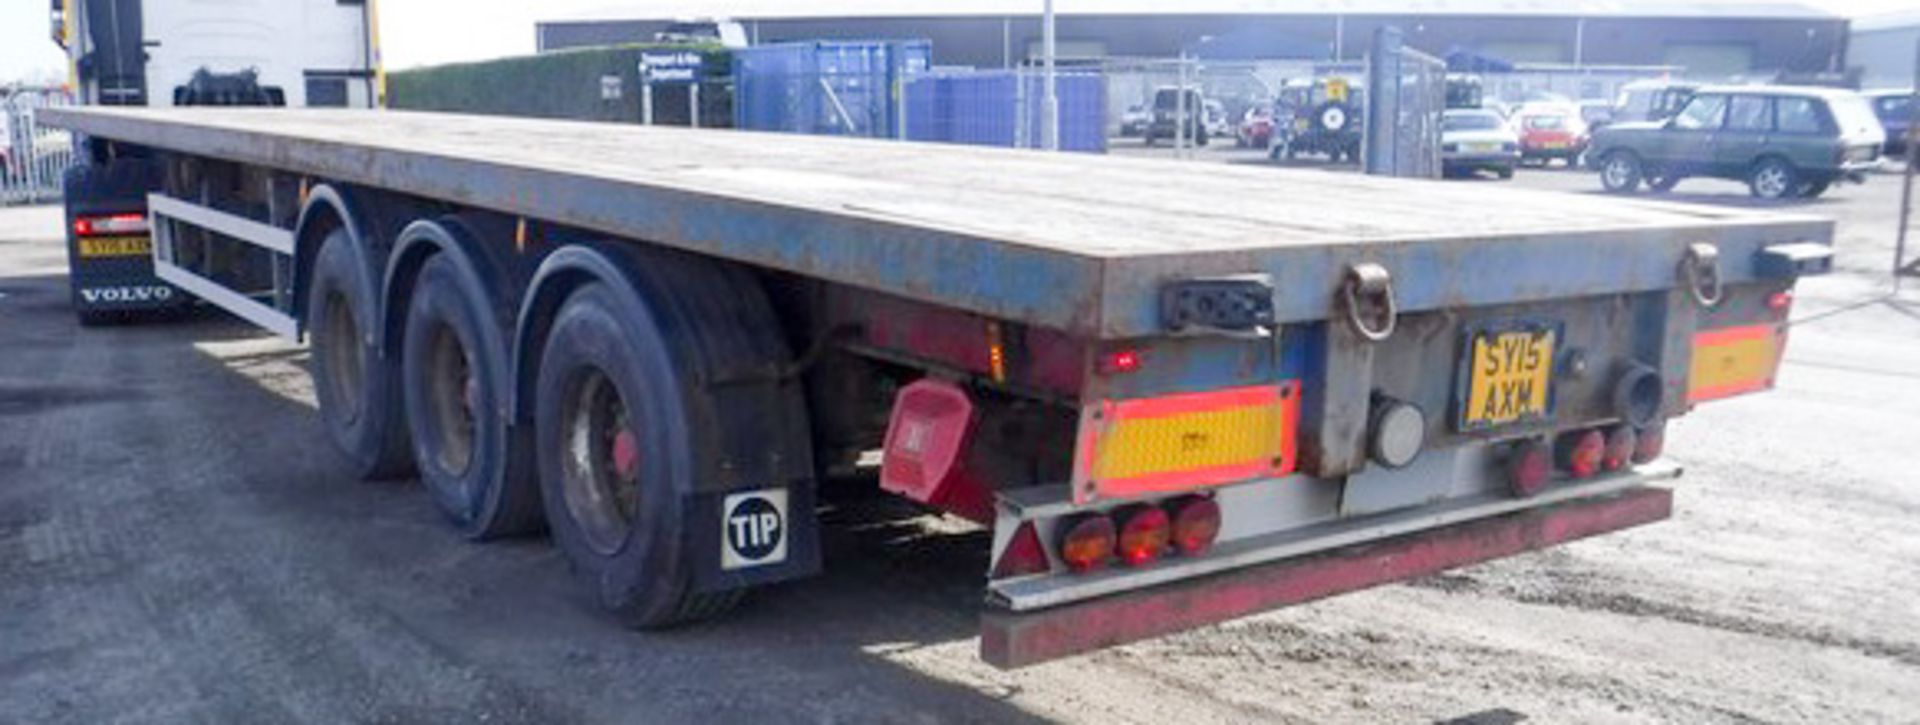 2004 MONTRACON FLATBED, REG C160047, ID 22187, 3 AXLES, MOT UNTIL NOVEMBER 2018 NO DOC IN OFFICE - Image 3 of 9